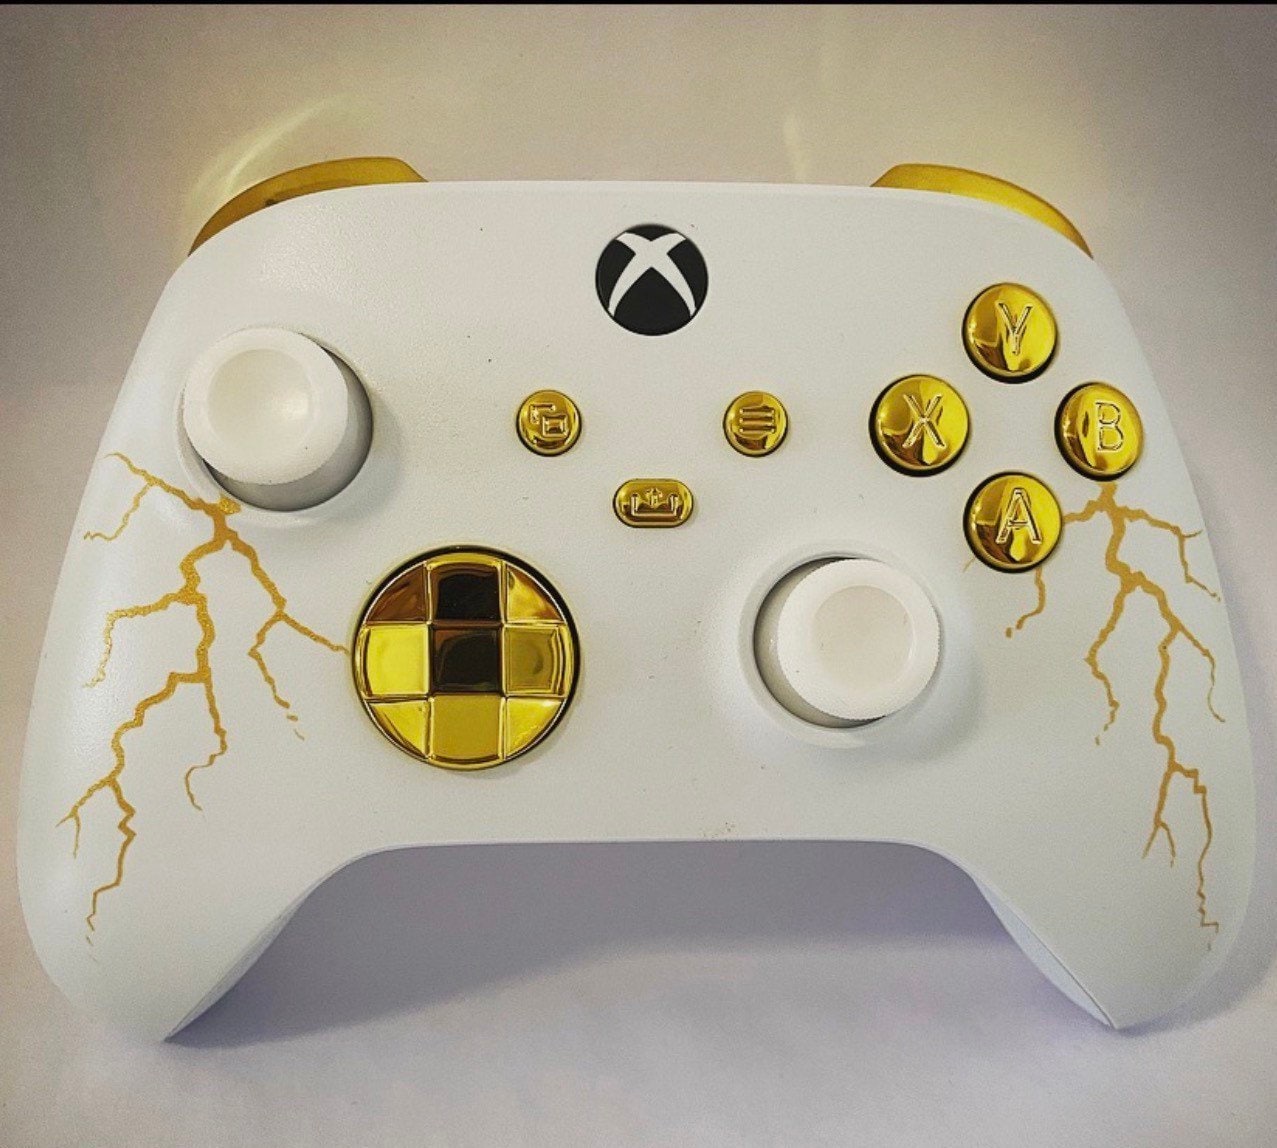 Xbox Buttons - Etsy